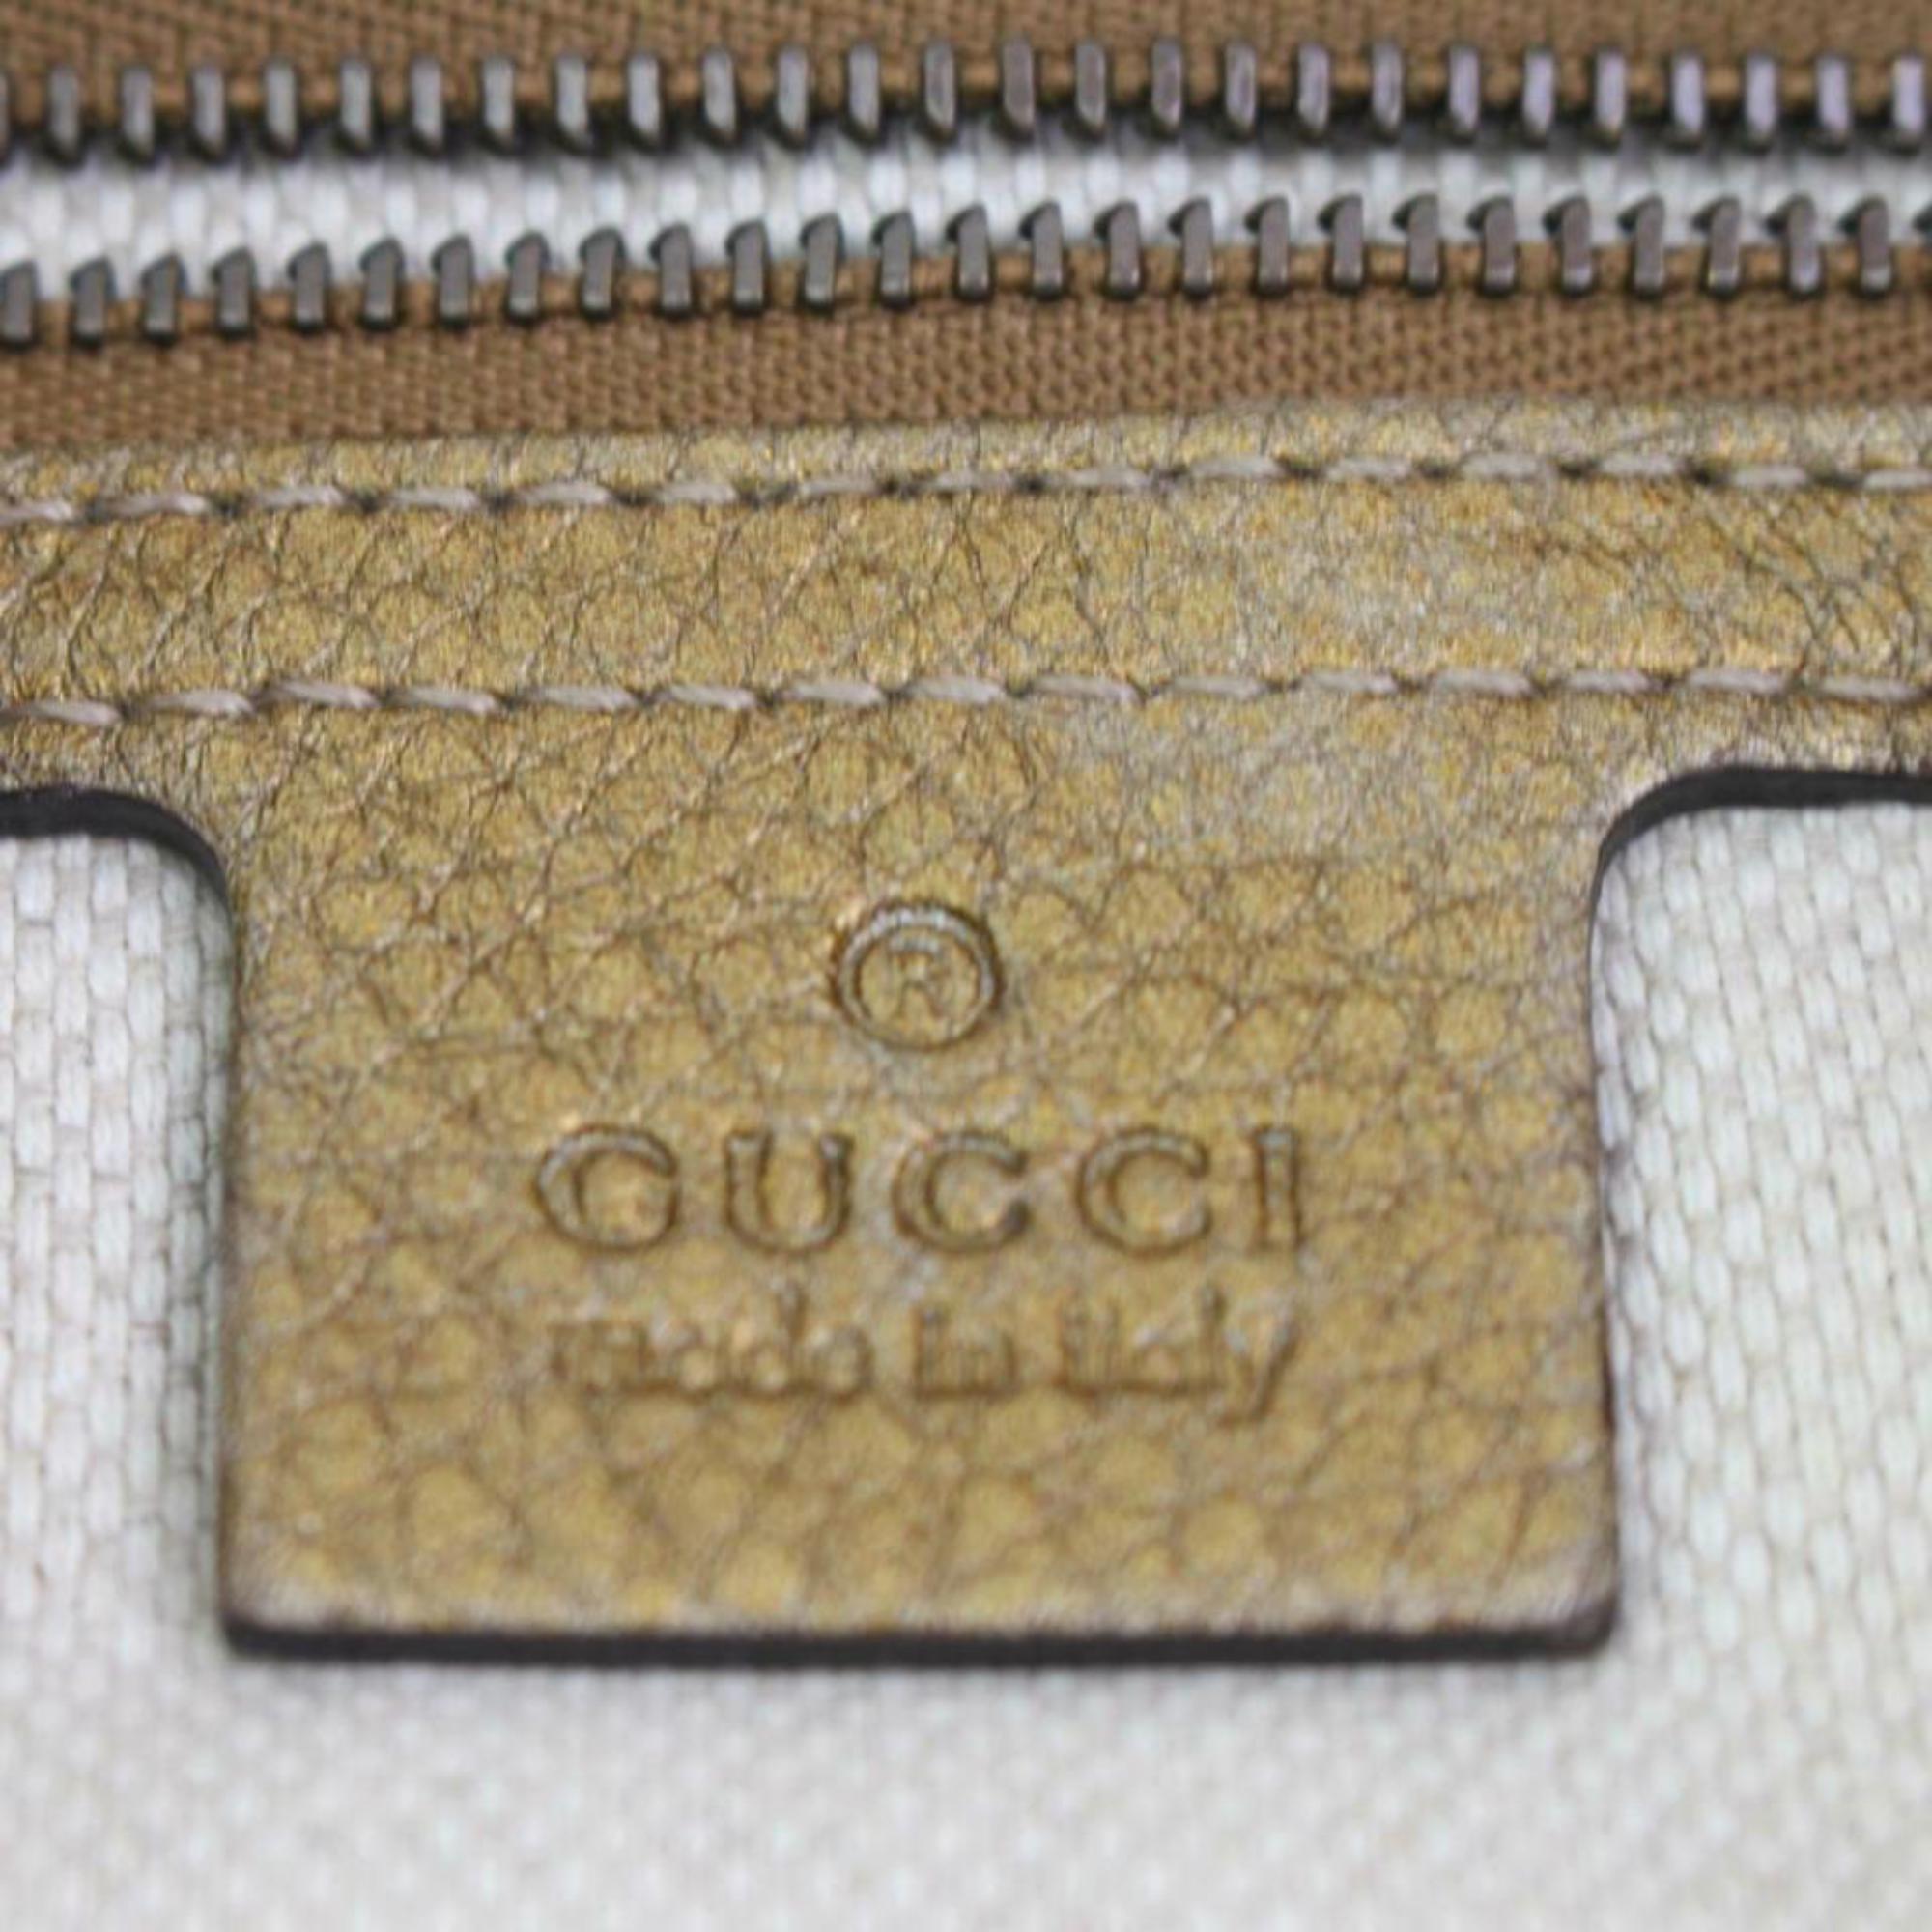 Gucci Ombre Soho Tassel Gold Chain Tote 870595 Beaige Leather Shoulder Bag In Good Condition For Sale In Forest Hills, NY